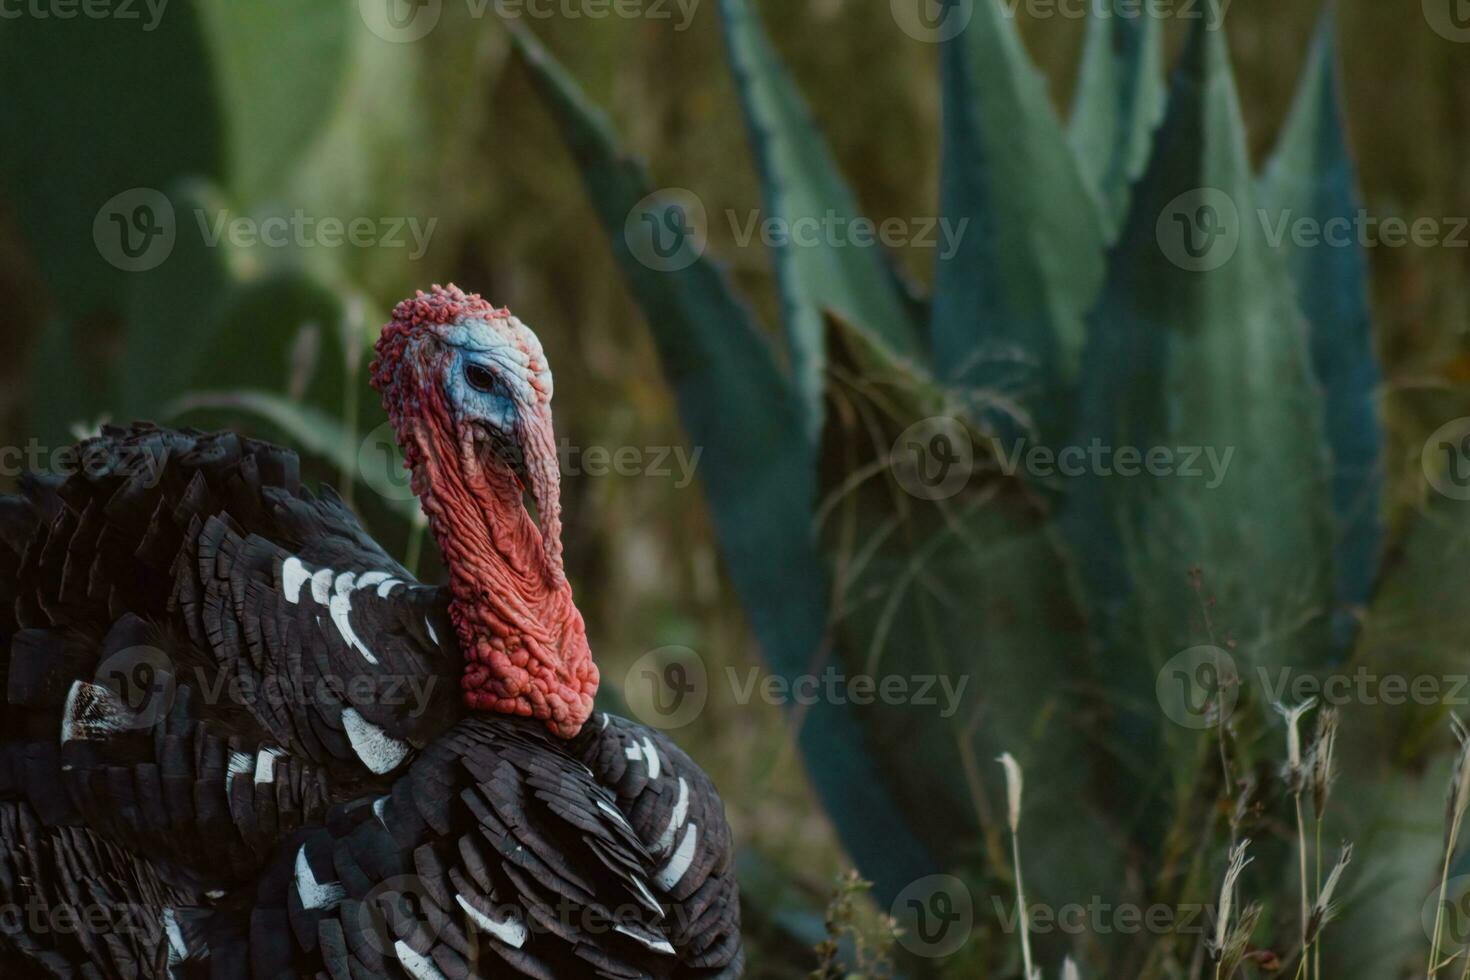 The turkey, a bird of nature, blends with the plant-filled surroundings photo